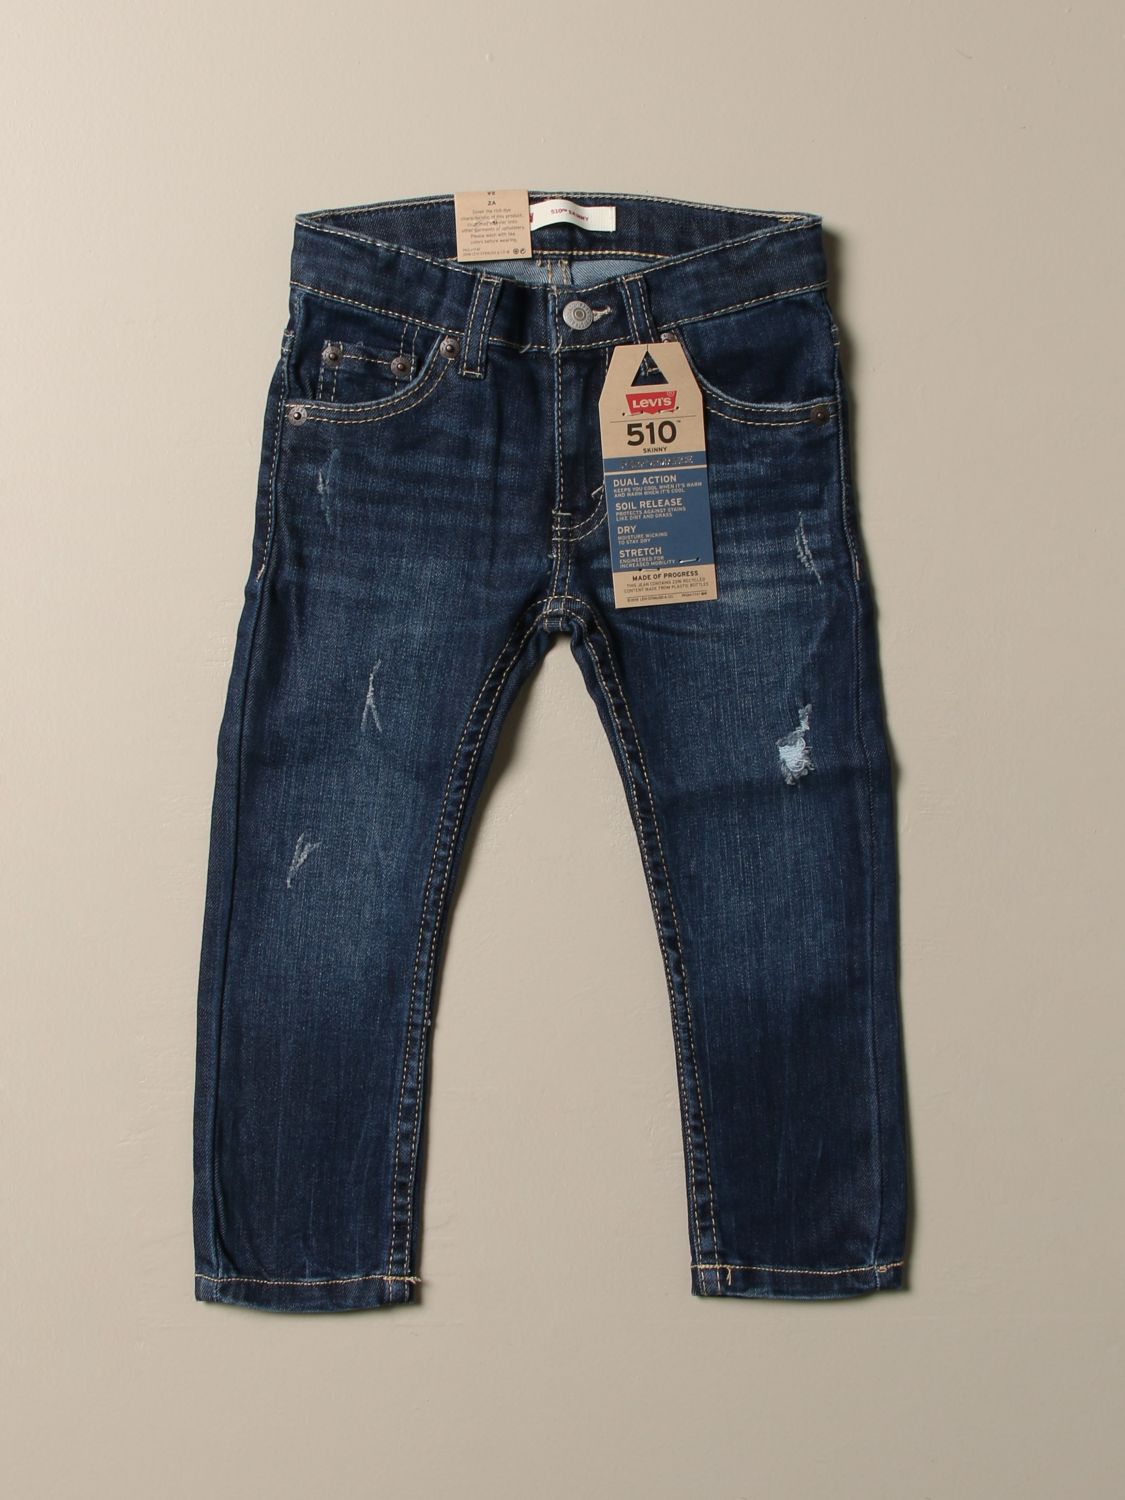 Levi S Outlet 510 Skinny Jeans In Denim With Micro Tears Jeans Levi S Kids Denim Jeans Levi S 8ea770 Giglio En